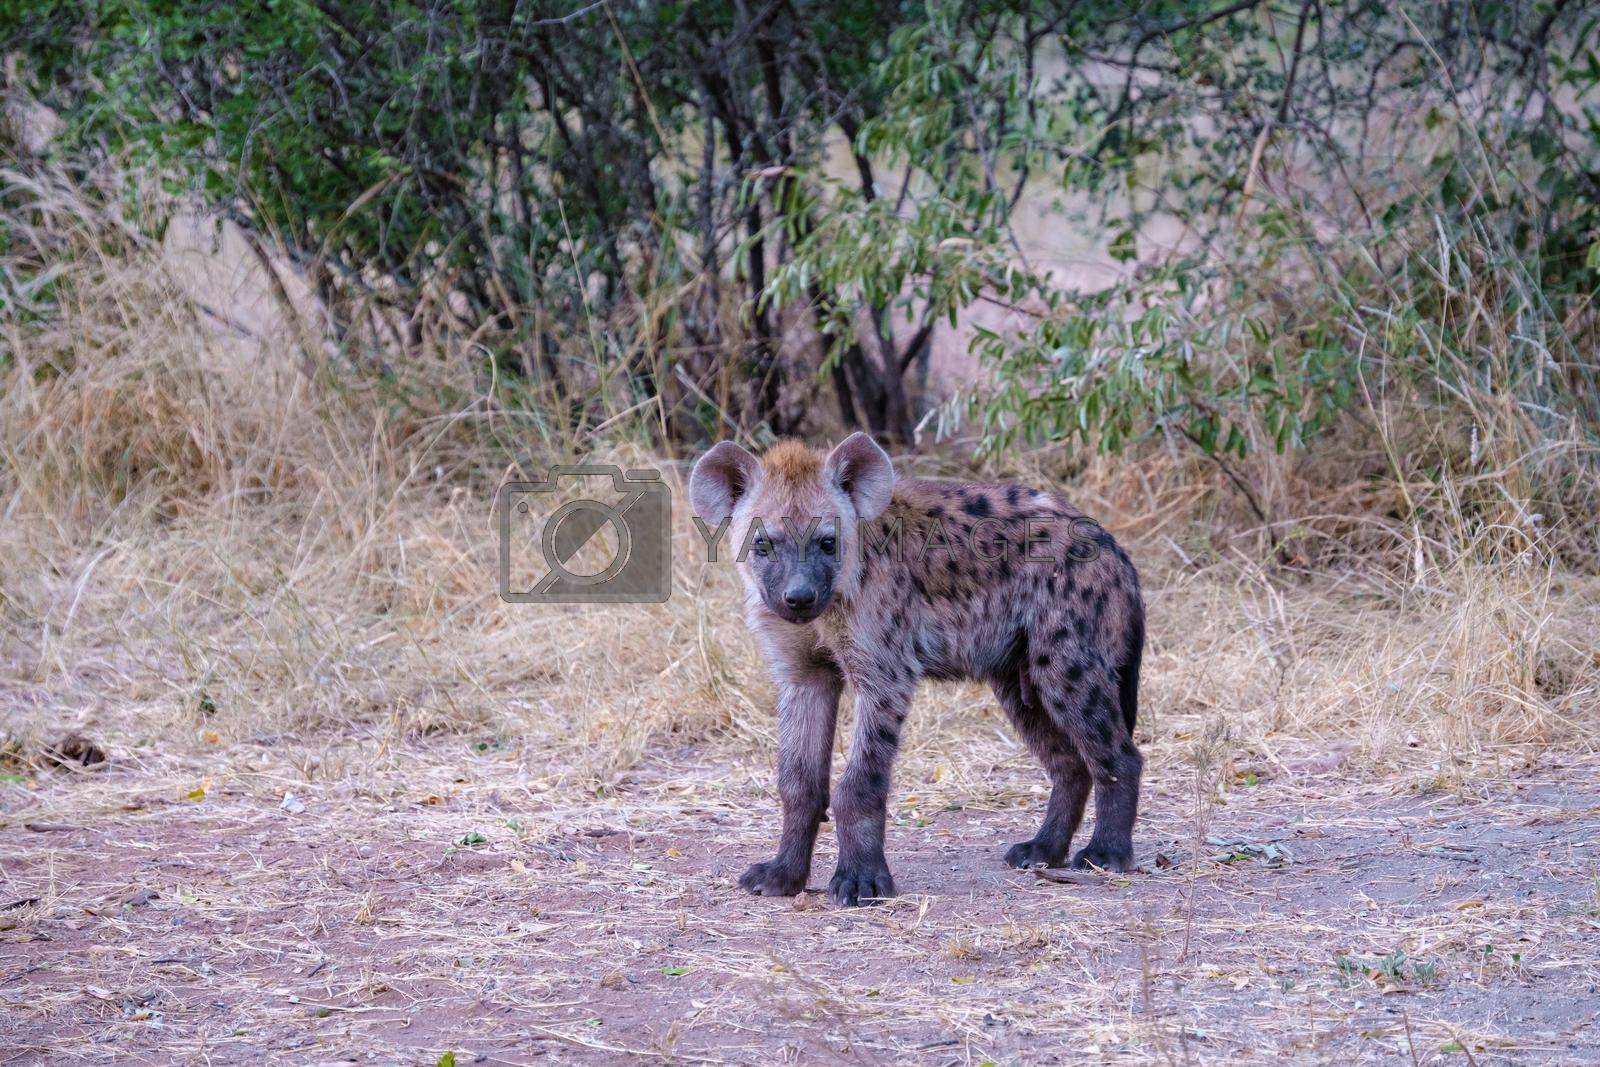 Royalty free image of young hyena in Kruger national park South Africa, Hyena family in South Africa by fokkebok